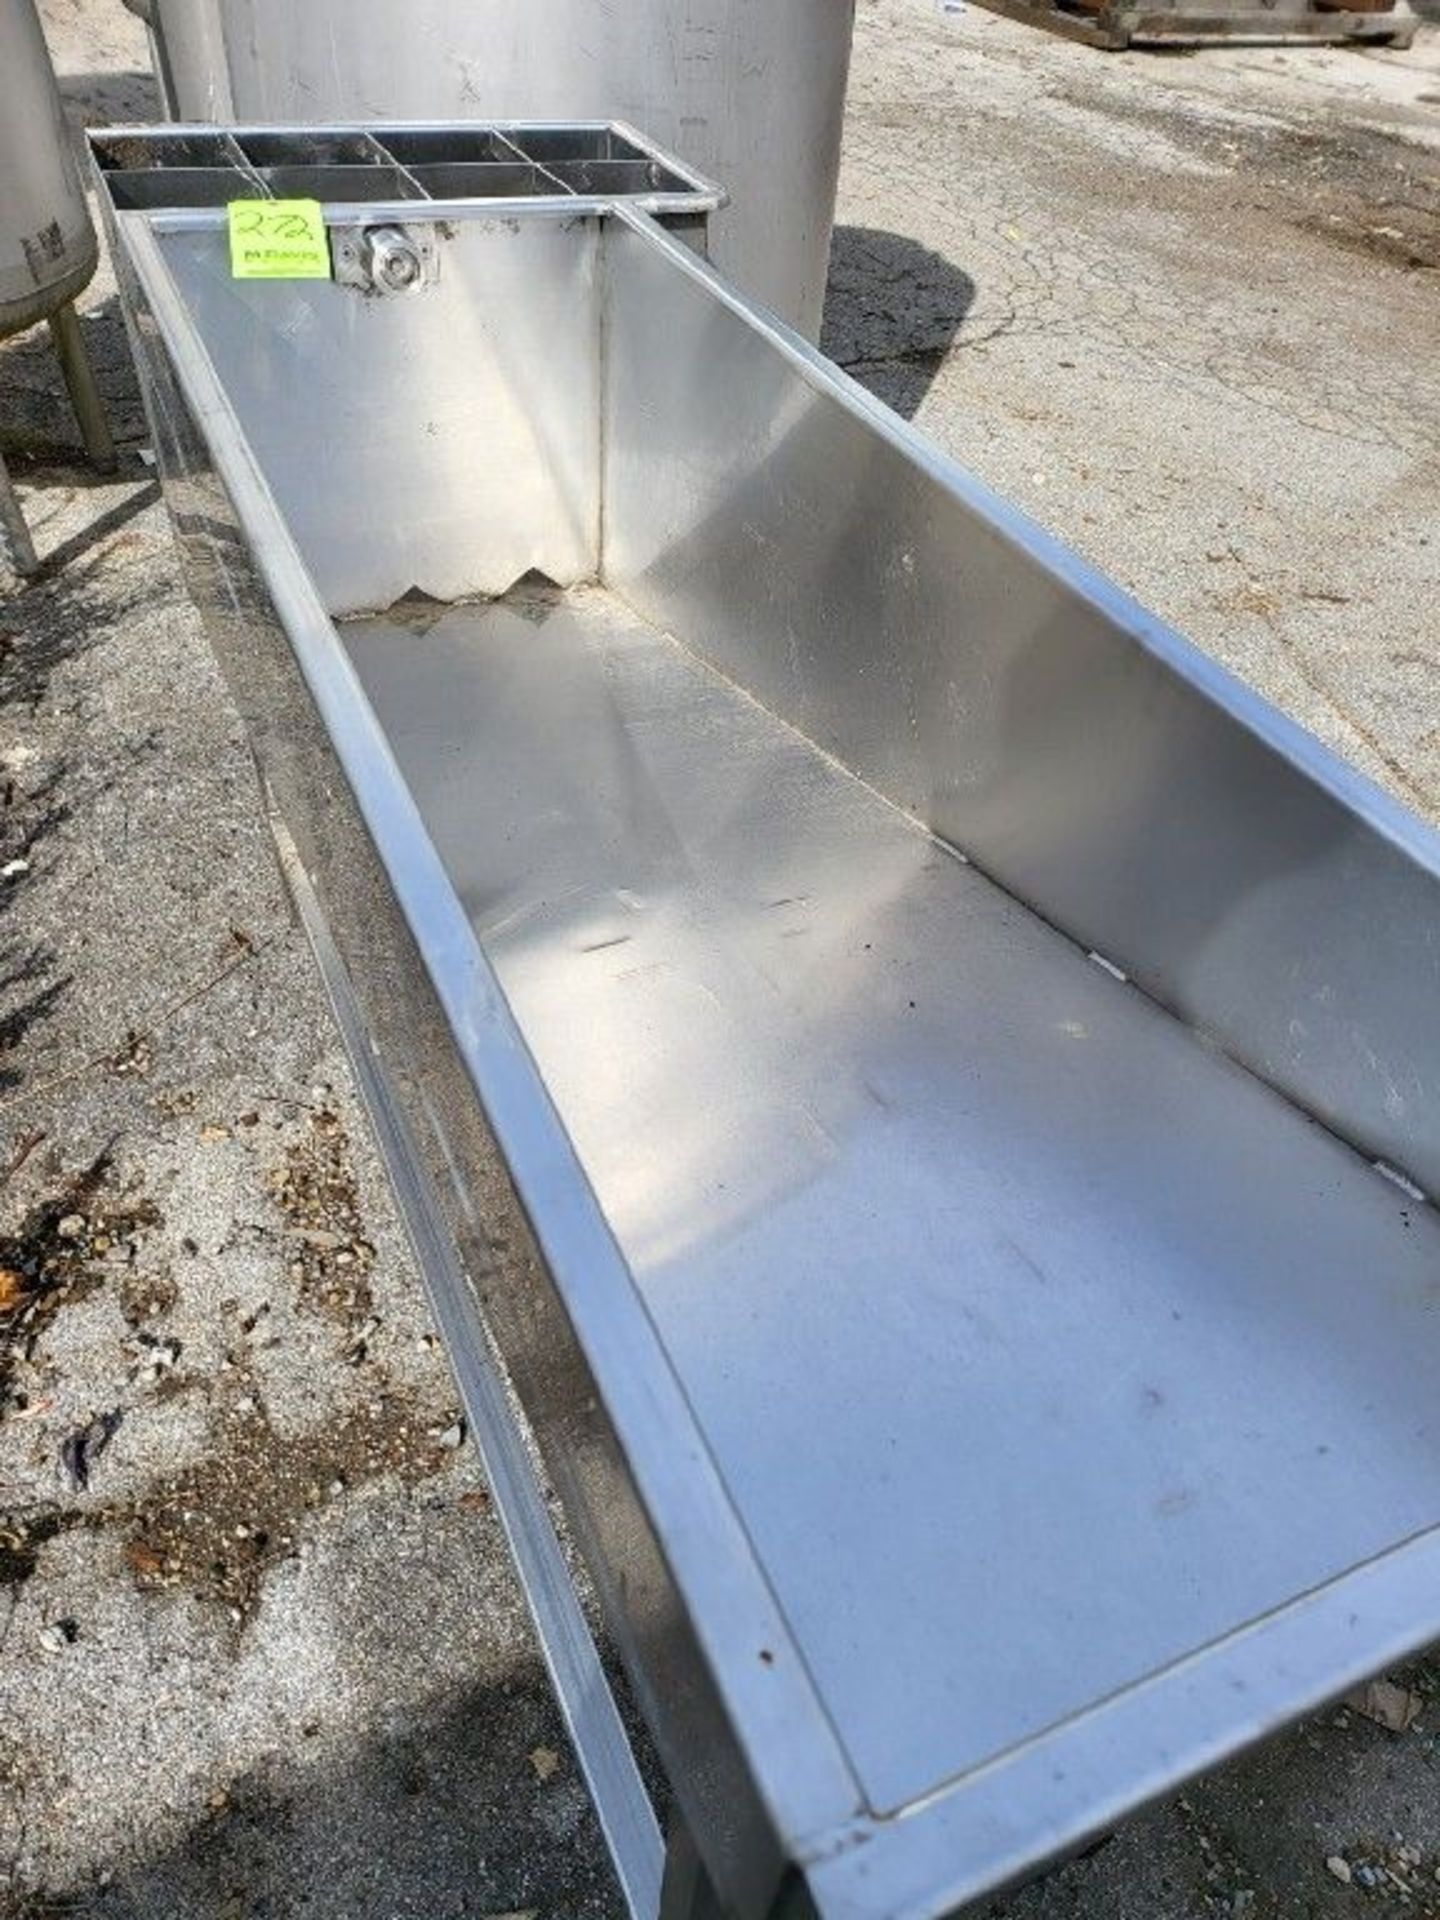 Qty (1) COP Wash Bay Trough - All Stainless Steel COP Was Bay Trough - Dimensions 68"L x 24"W x 36" - Image 2 of 3